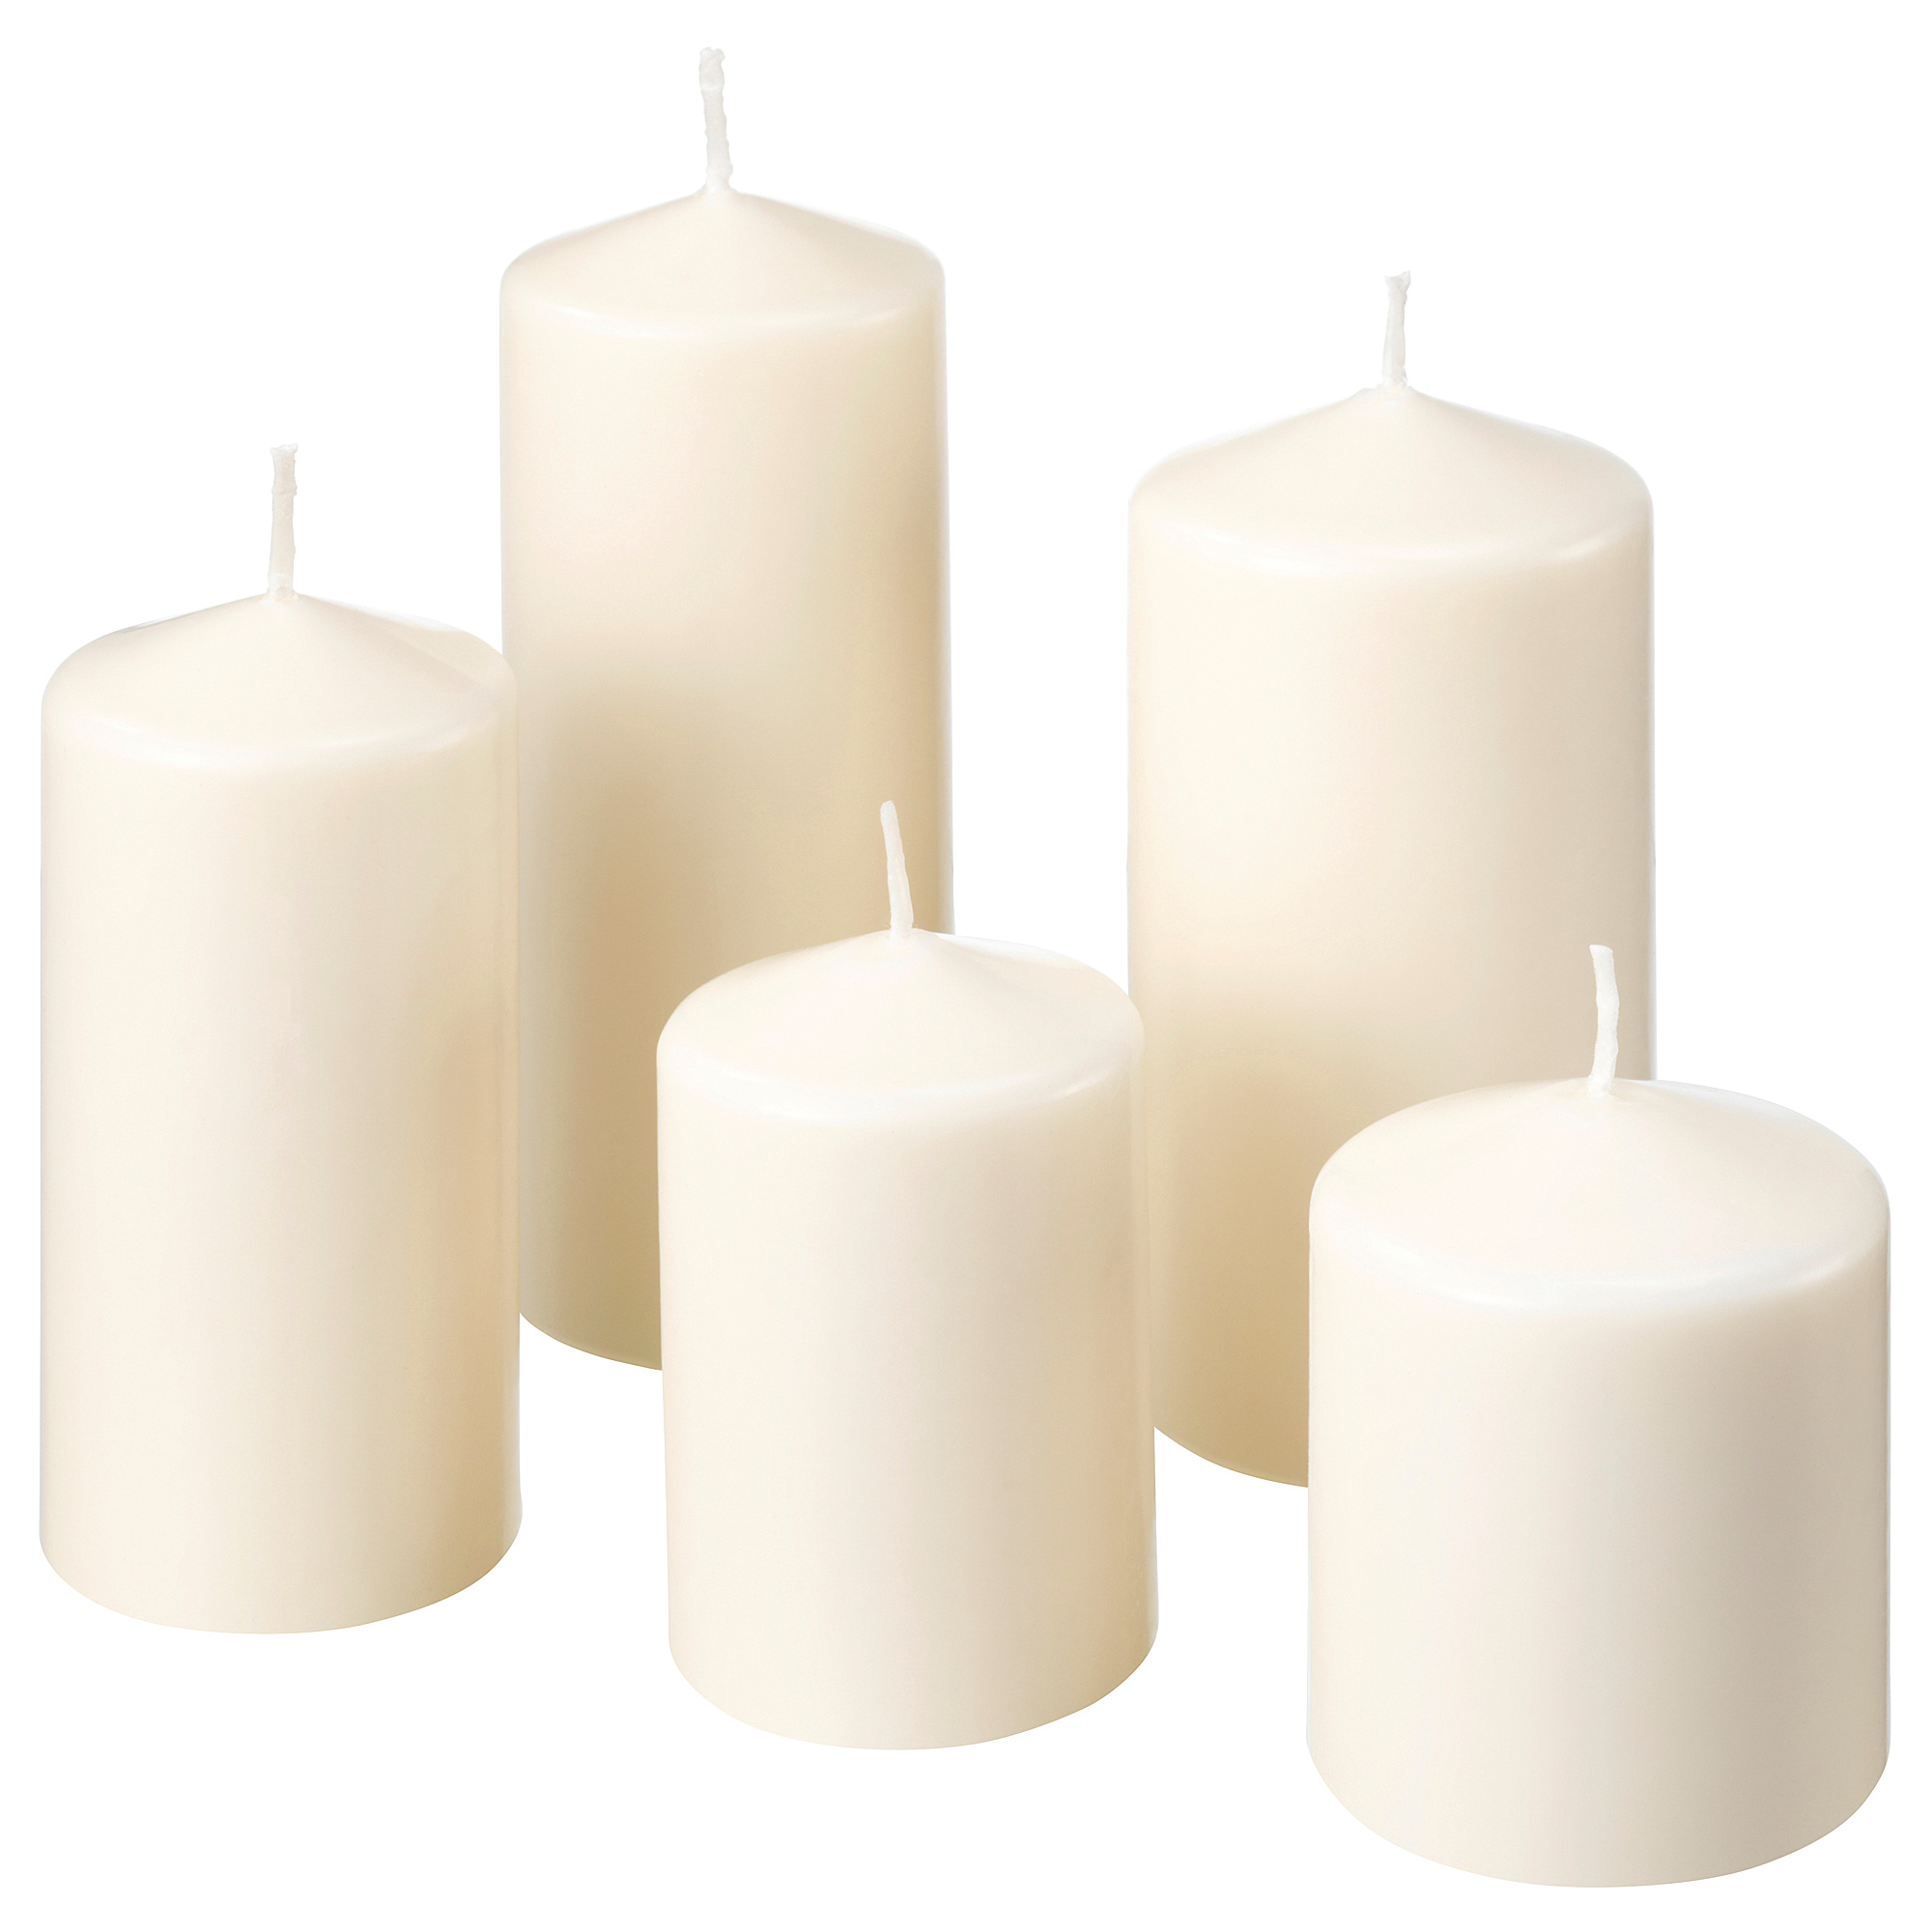 FENOMEN unscented block candle, set of 5